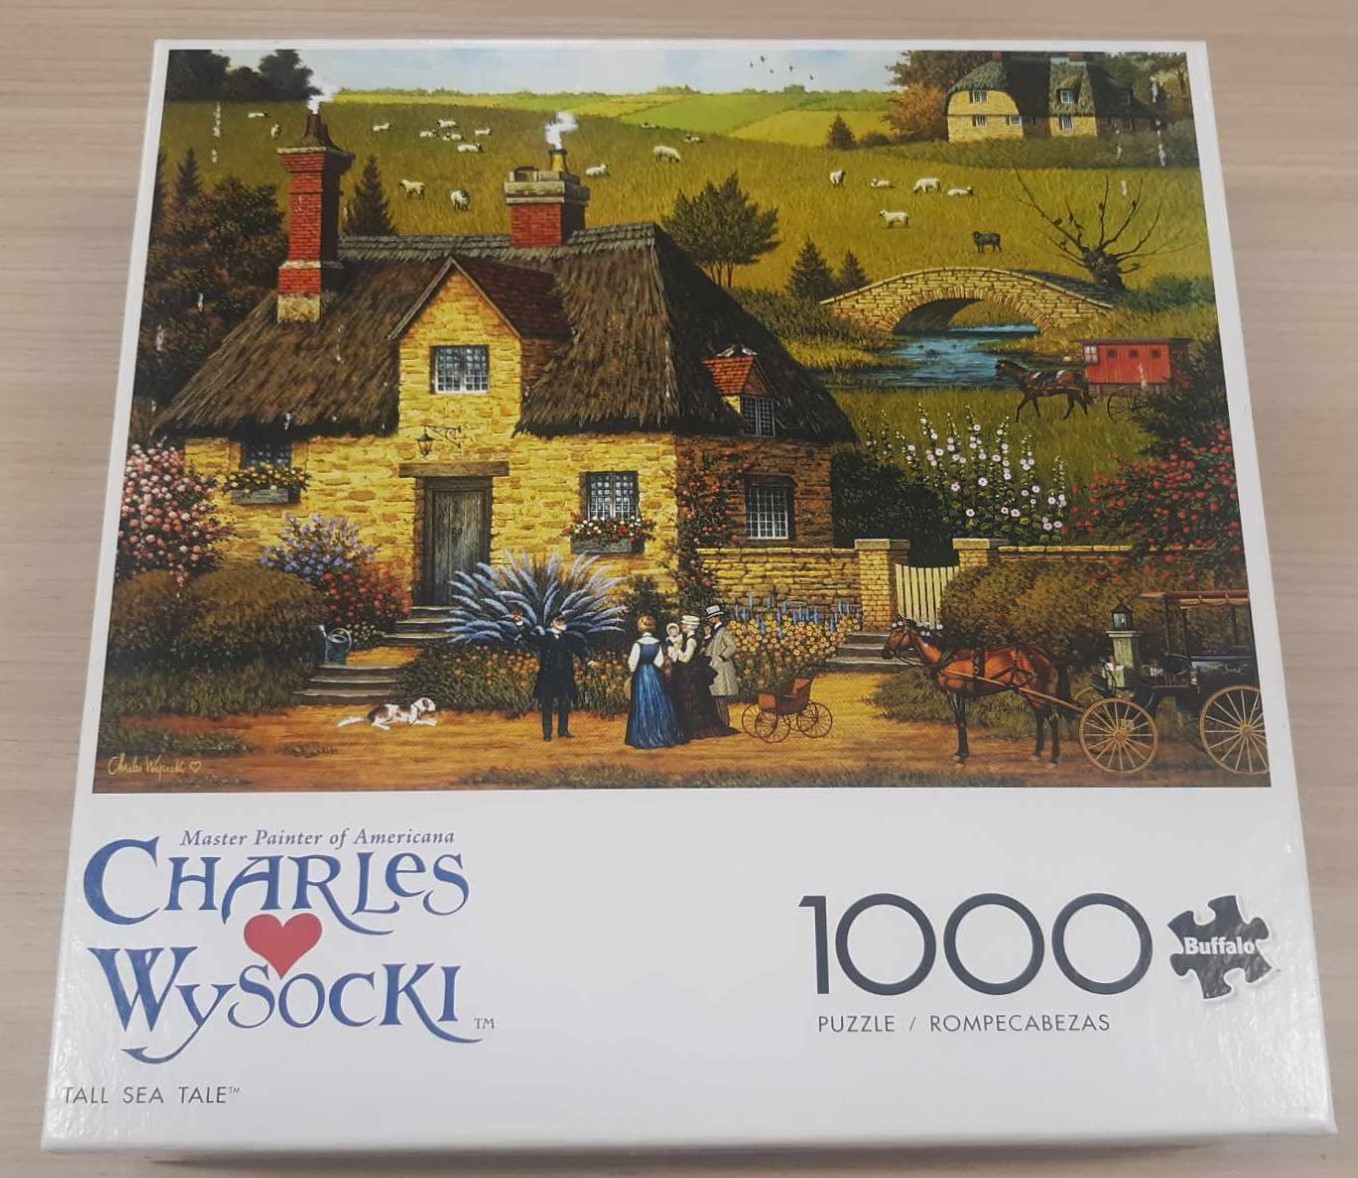 Image of a puzzle cover showing a cartoon rendering of a house next to a sheep field.